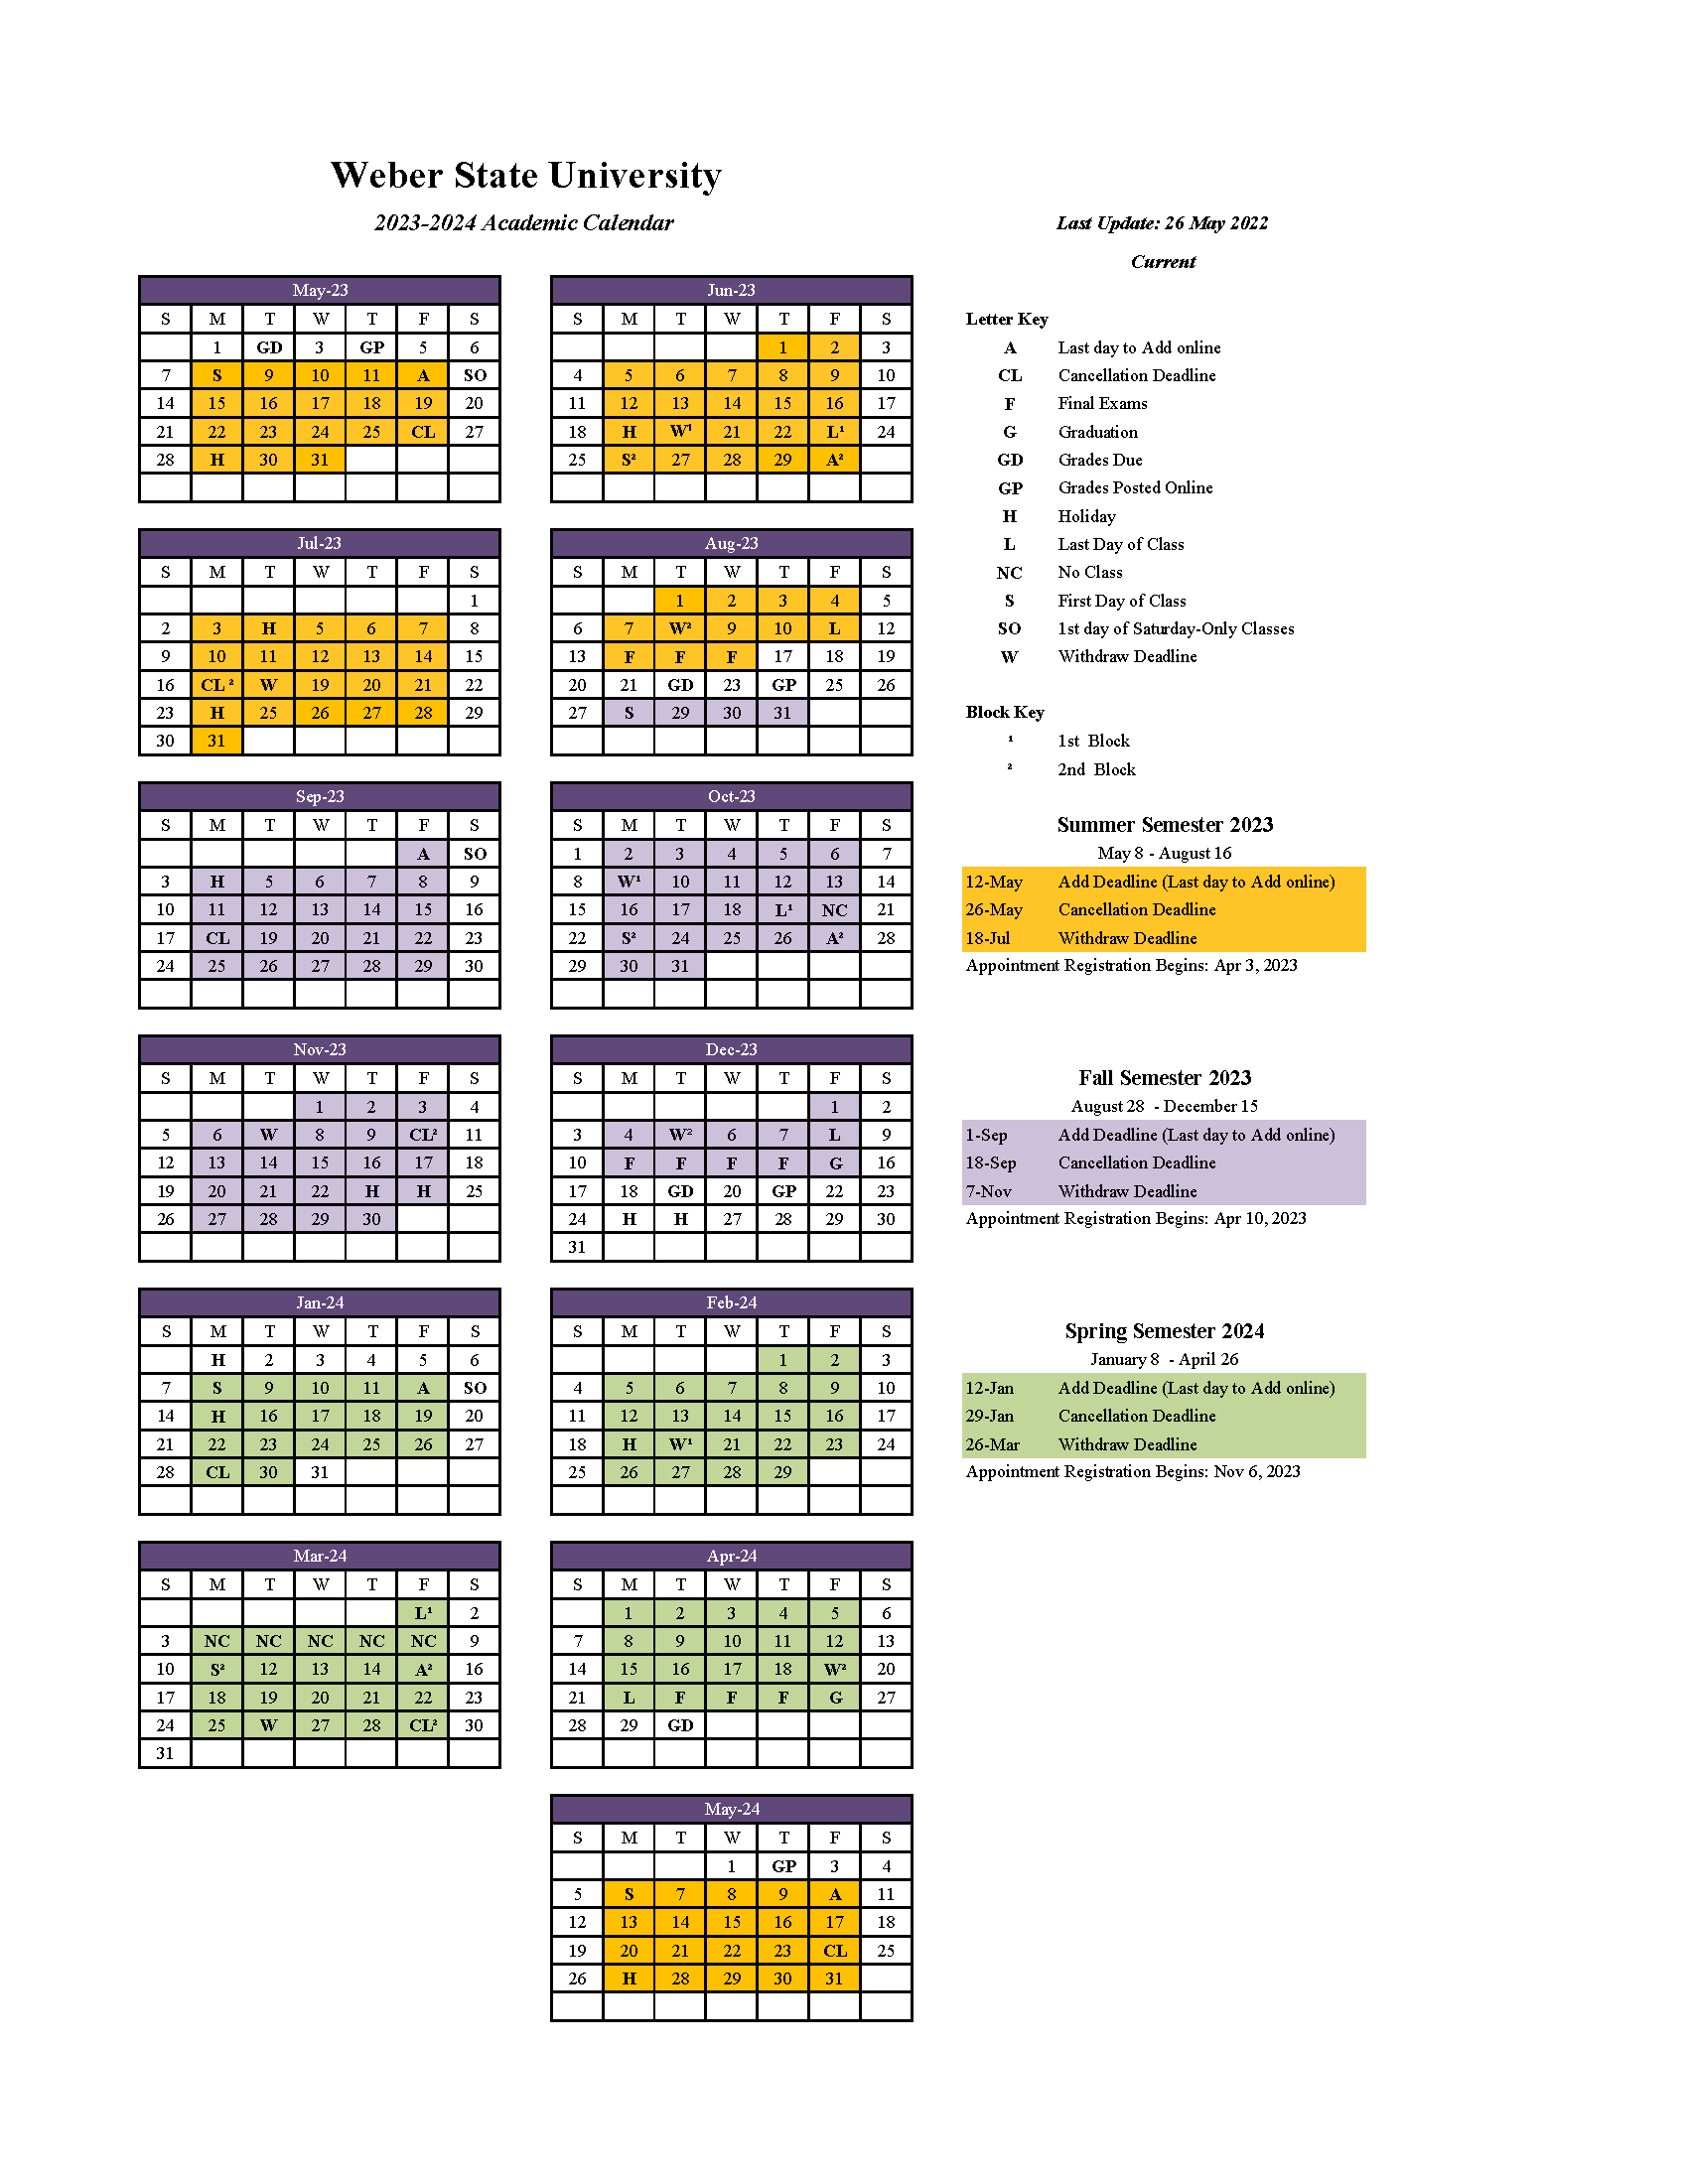 UT Spring 2024 Calendar A Comprehensive Guide to All Important Dates